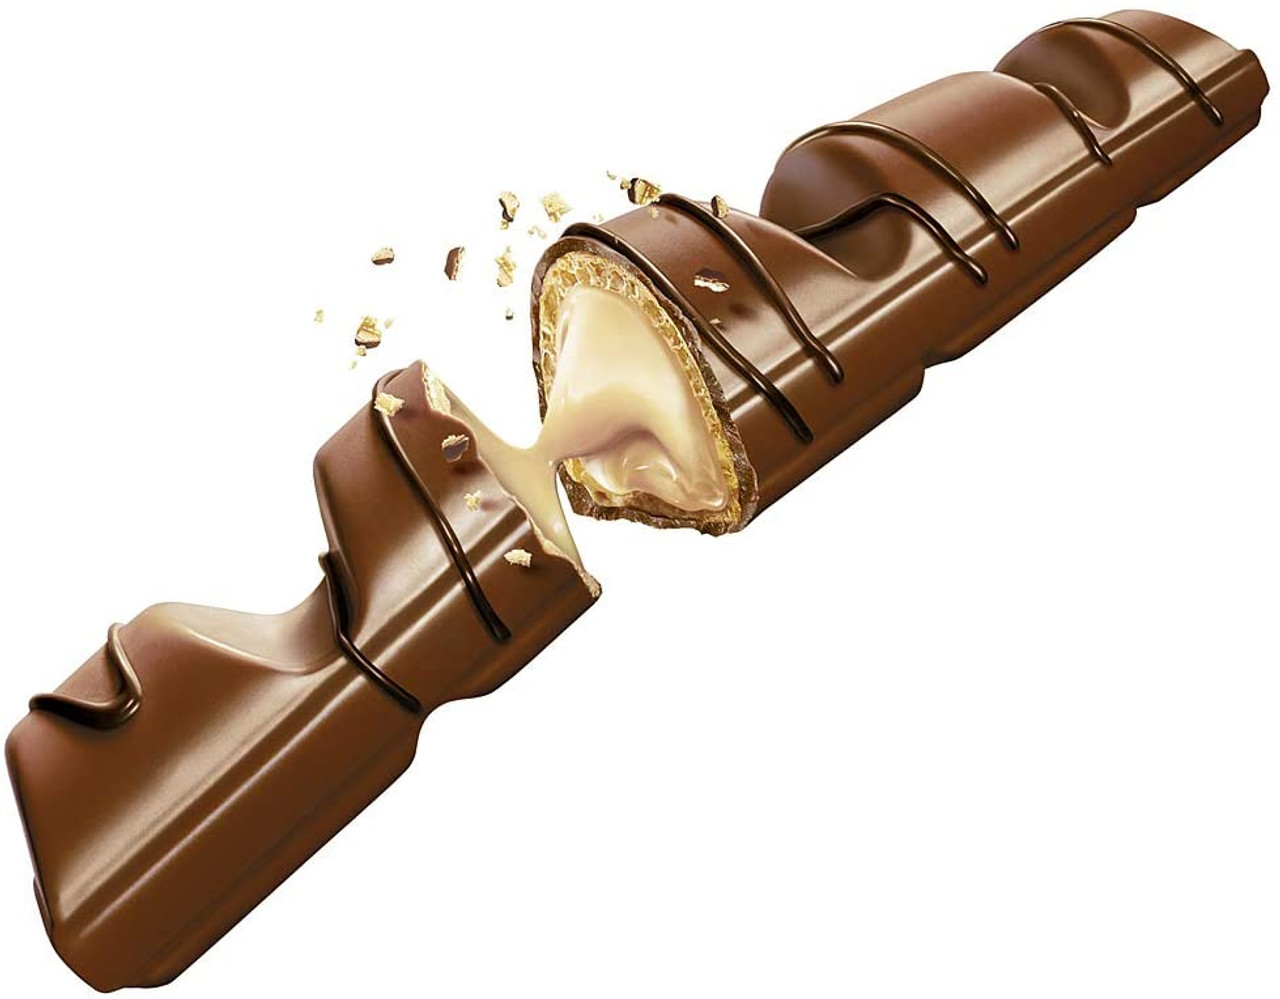 Delicious Wholesale Kinder Bueno Chocolate As Sweet Treats